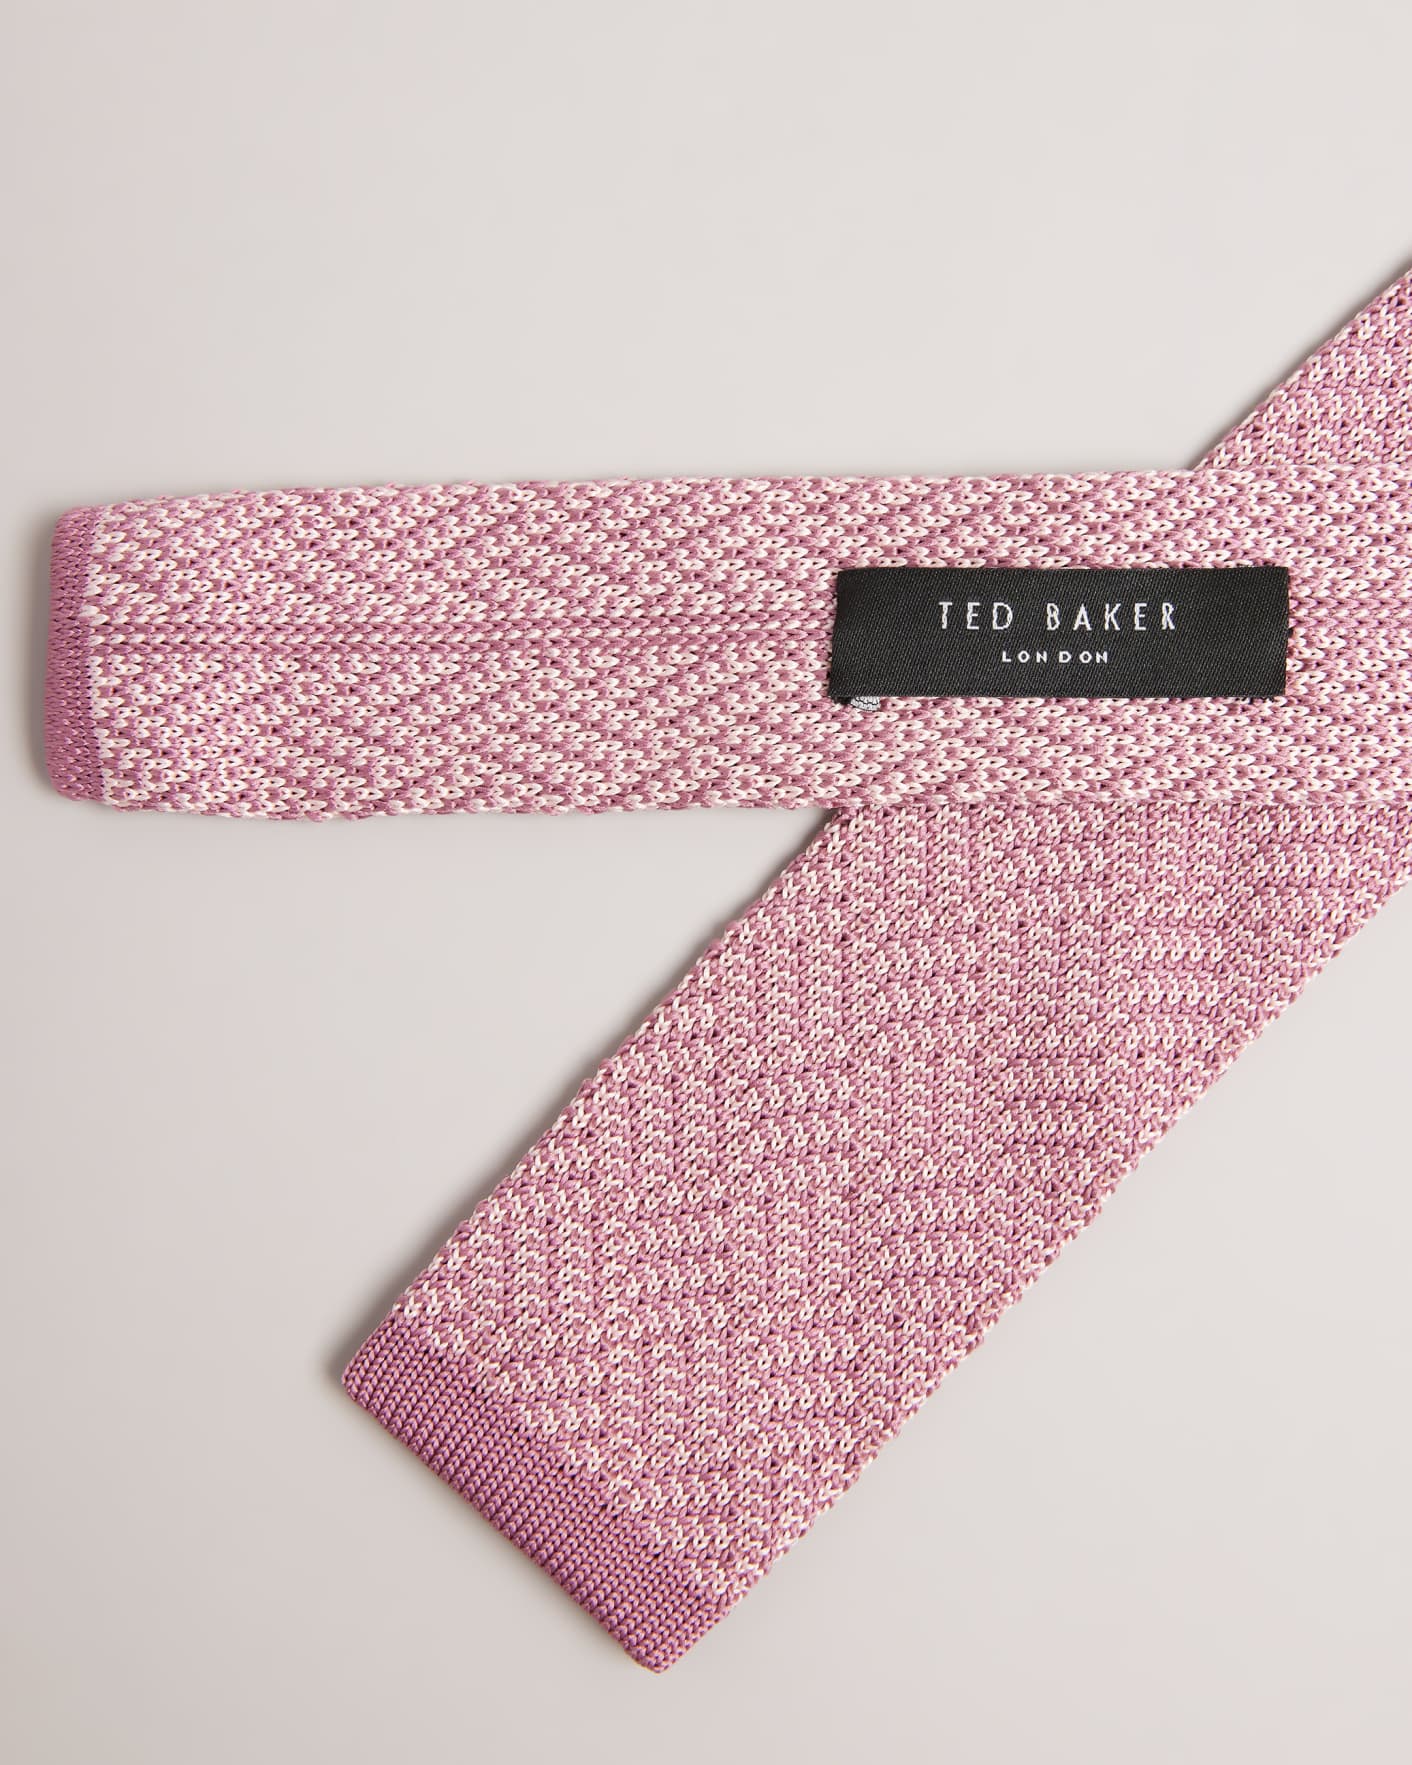 Dusky Pink Knitted Tie Ted Baker